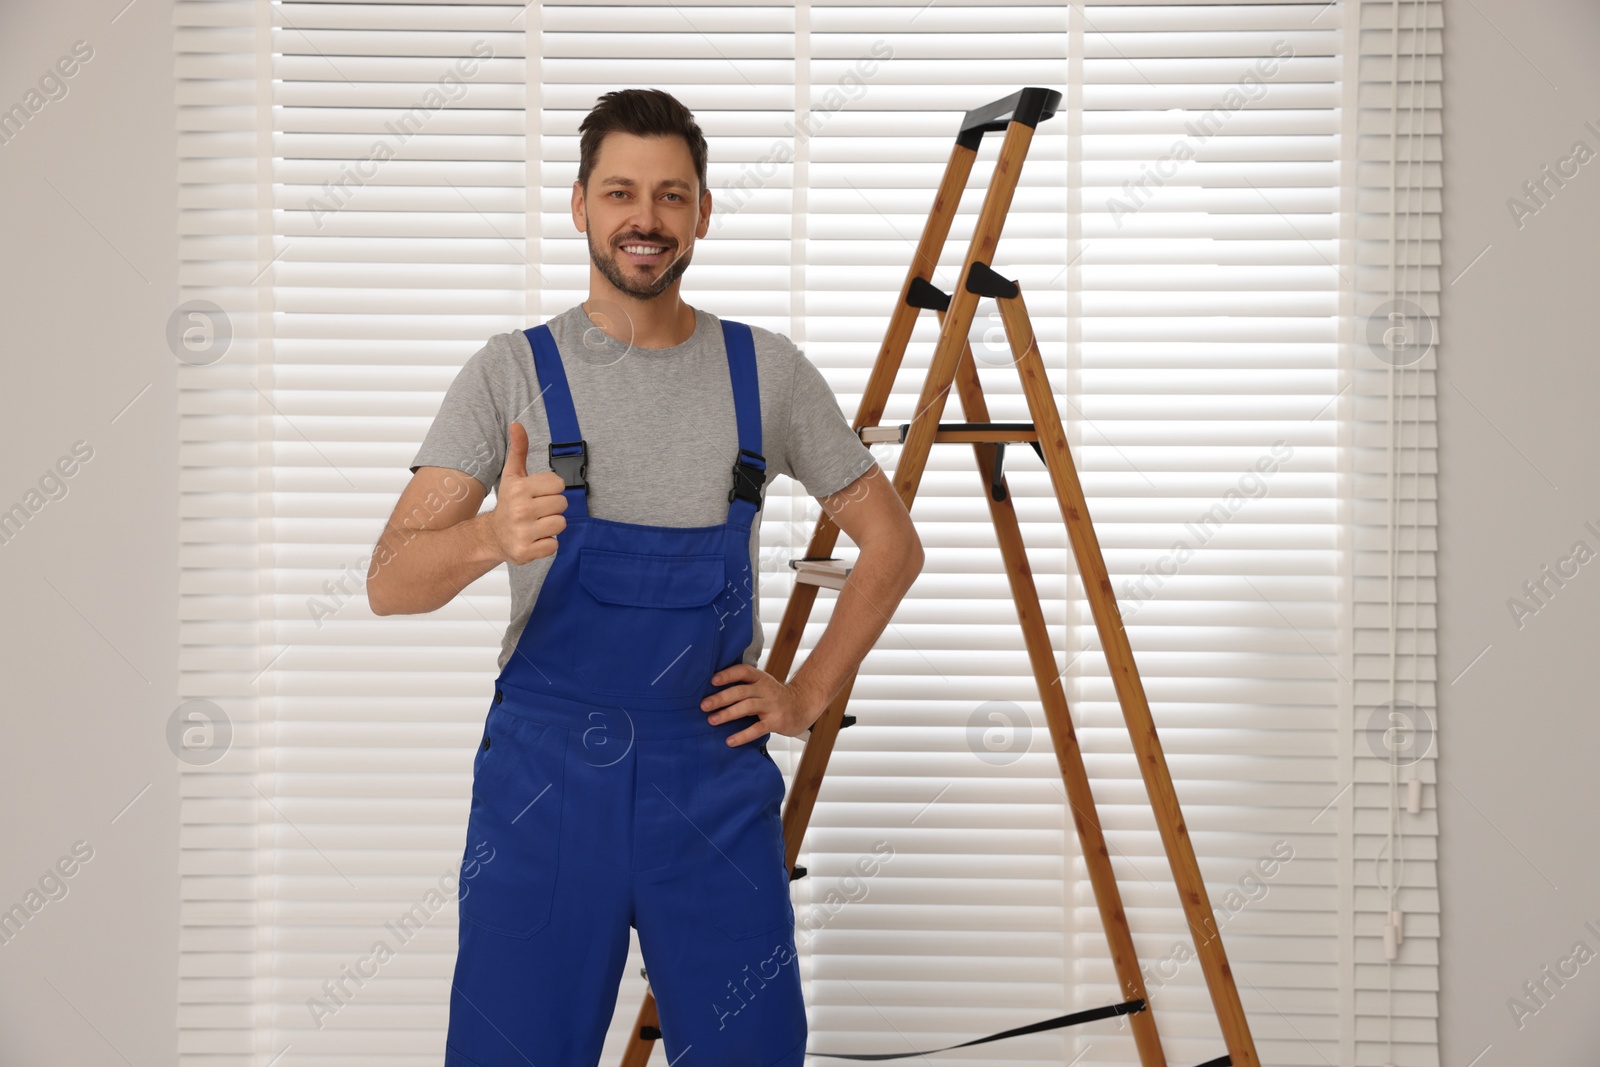 Photo of Worker in uniform and stepladder near horizontal window blinds indoors